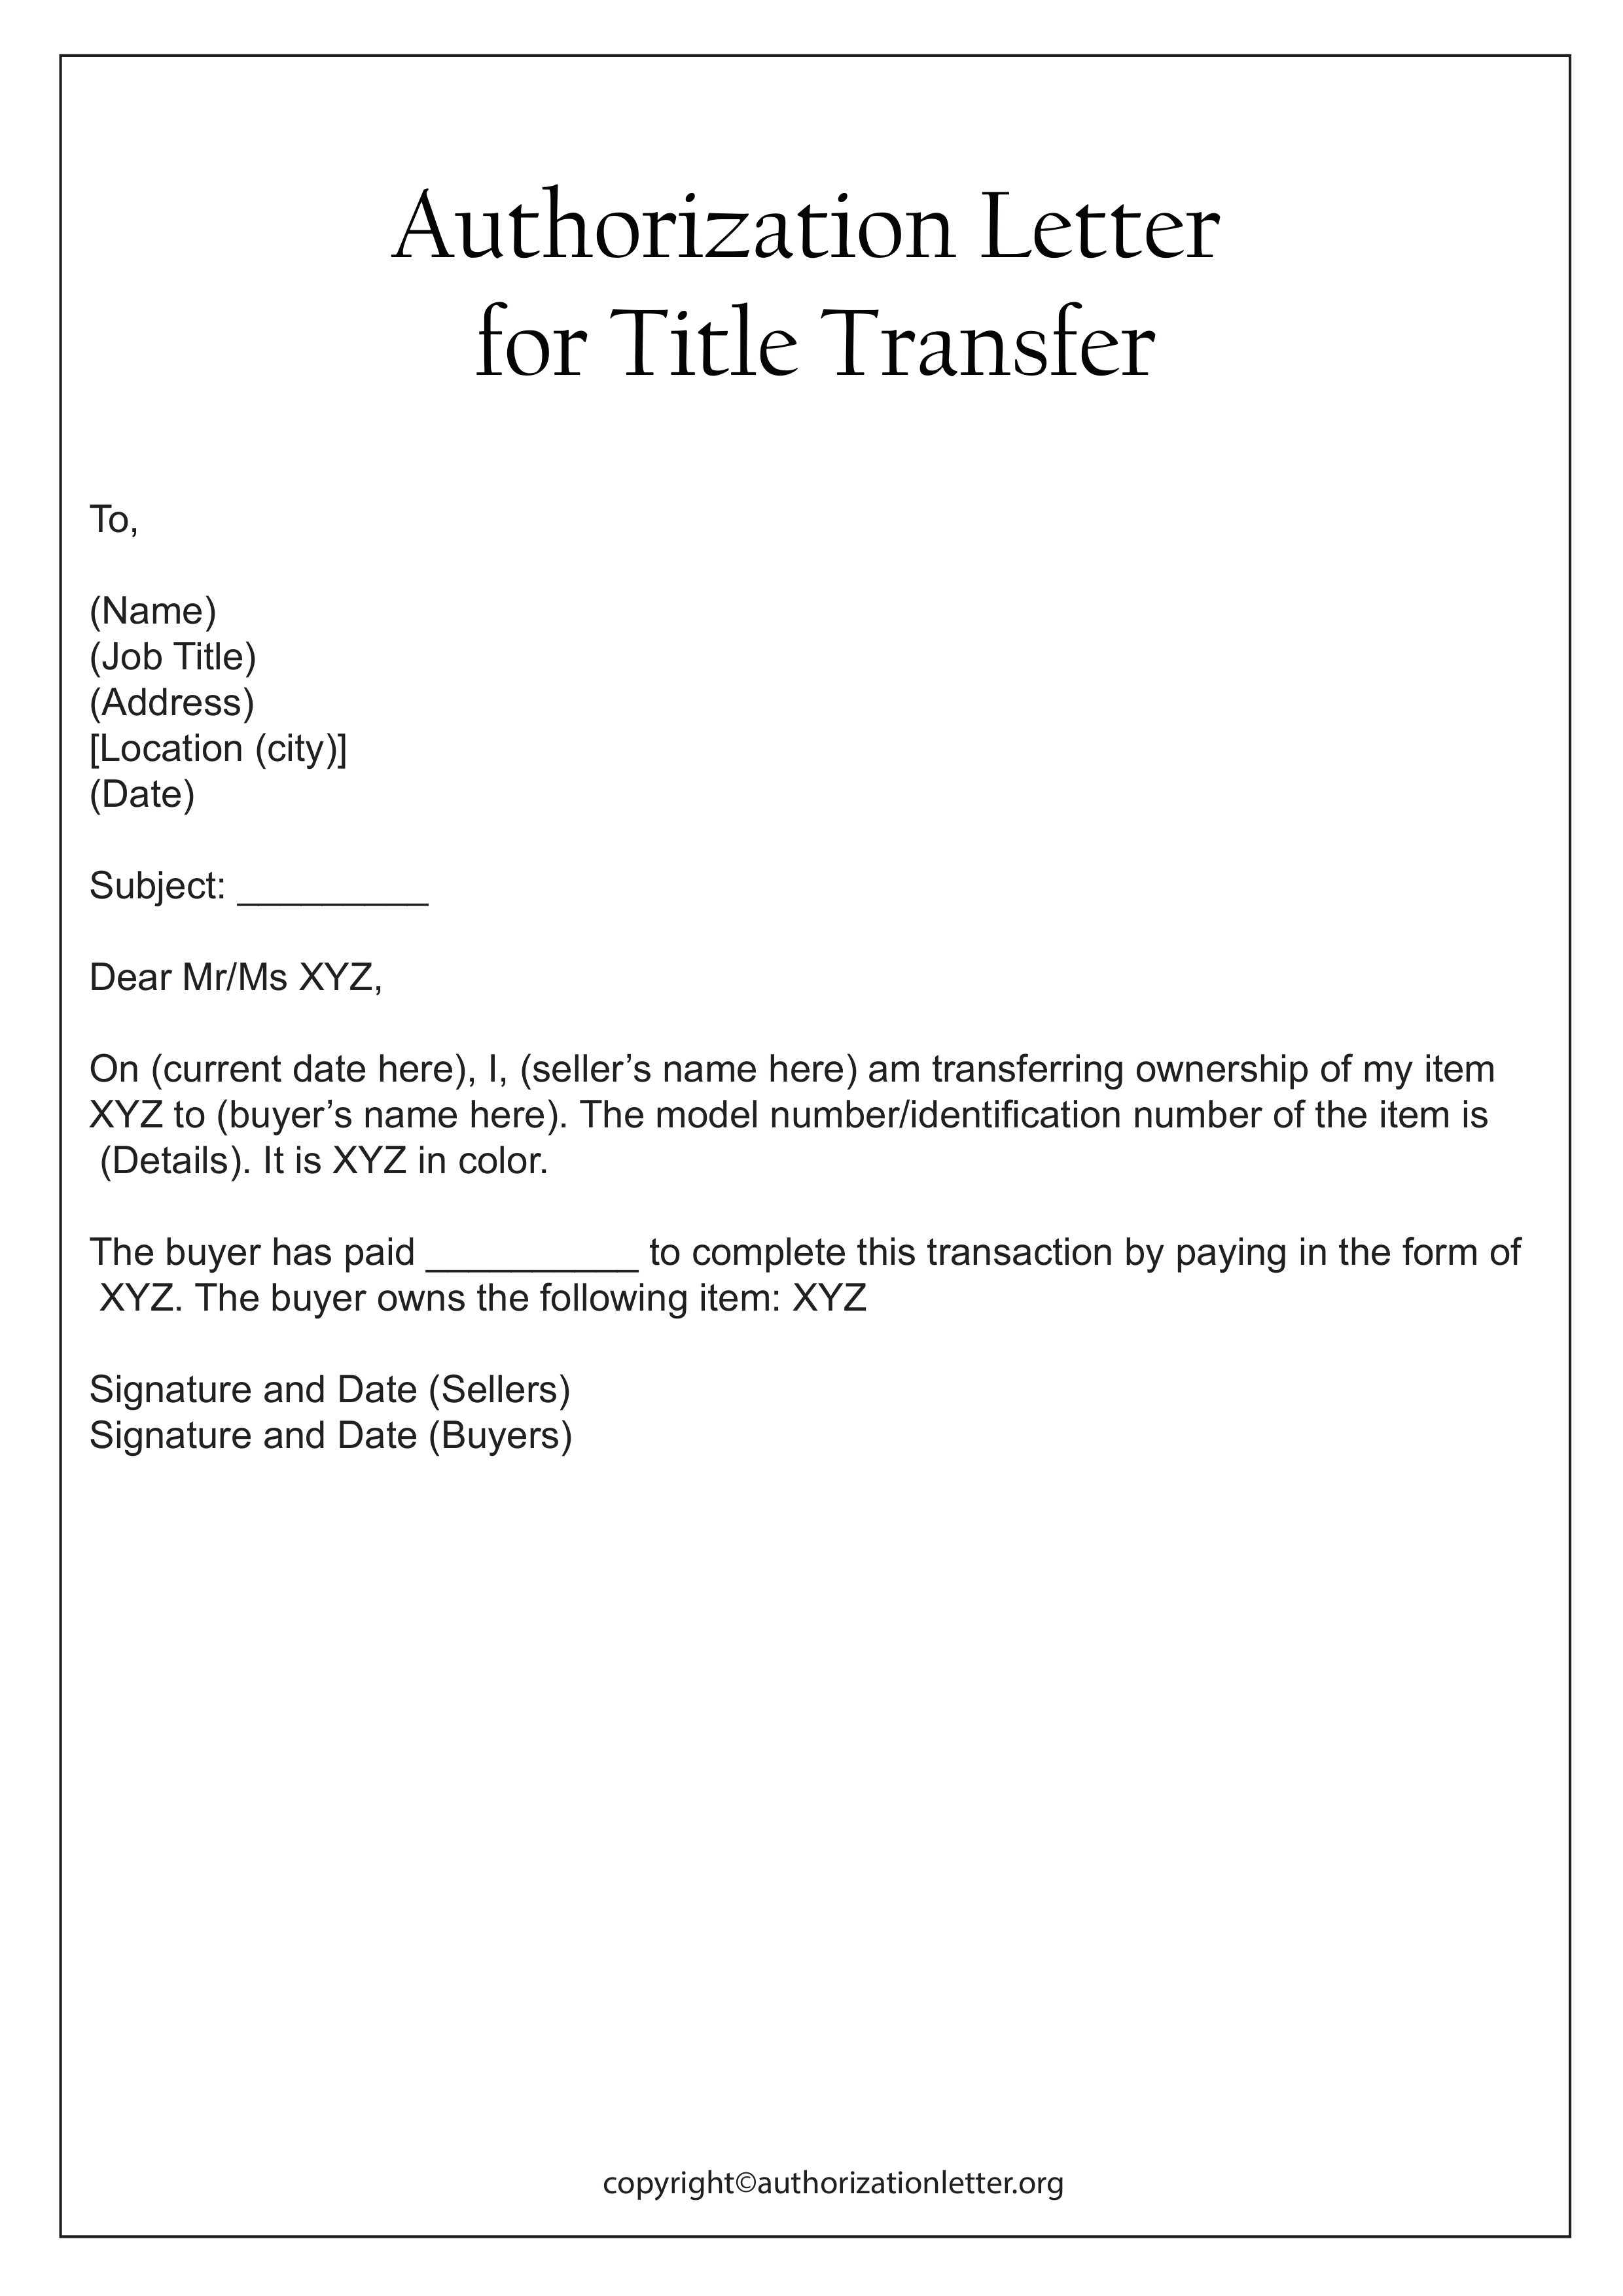 Sample Authorization Letter for Title Transfer